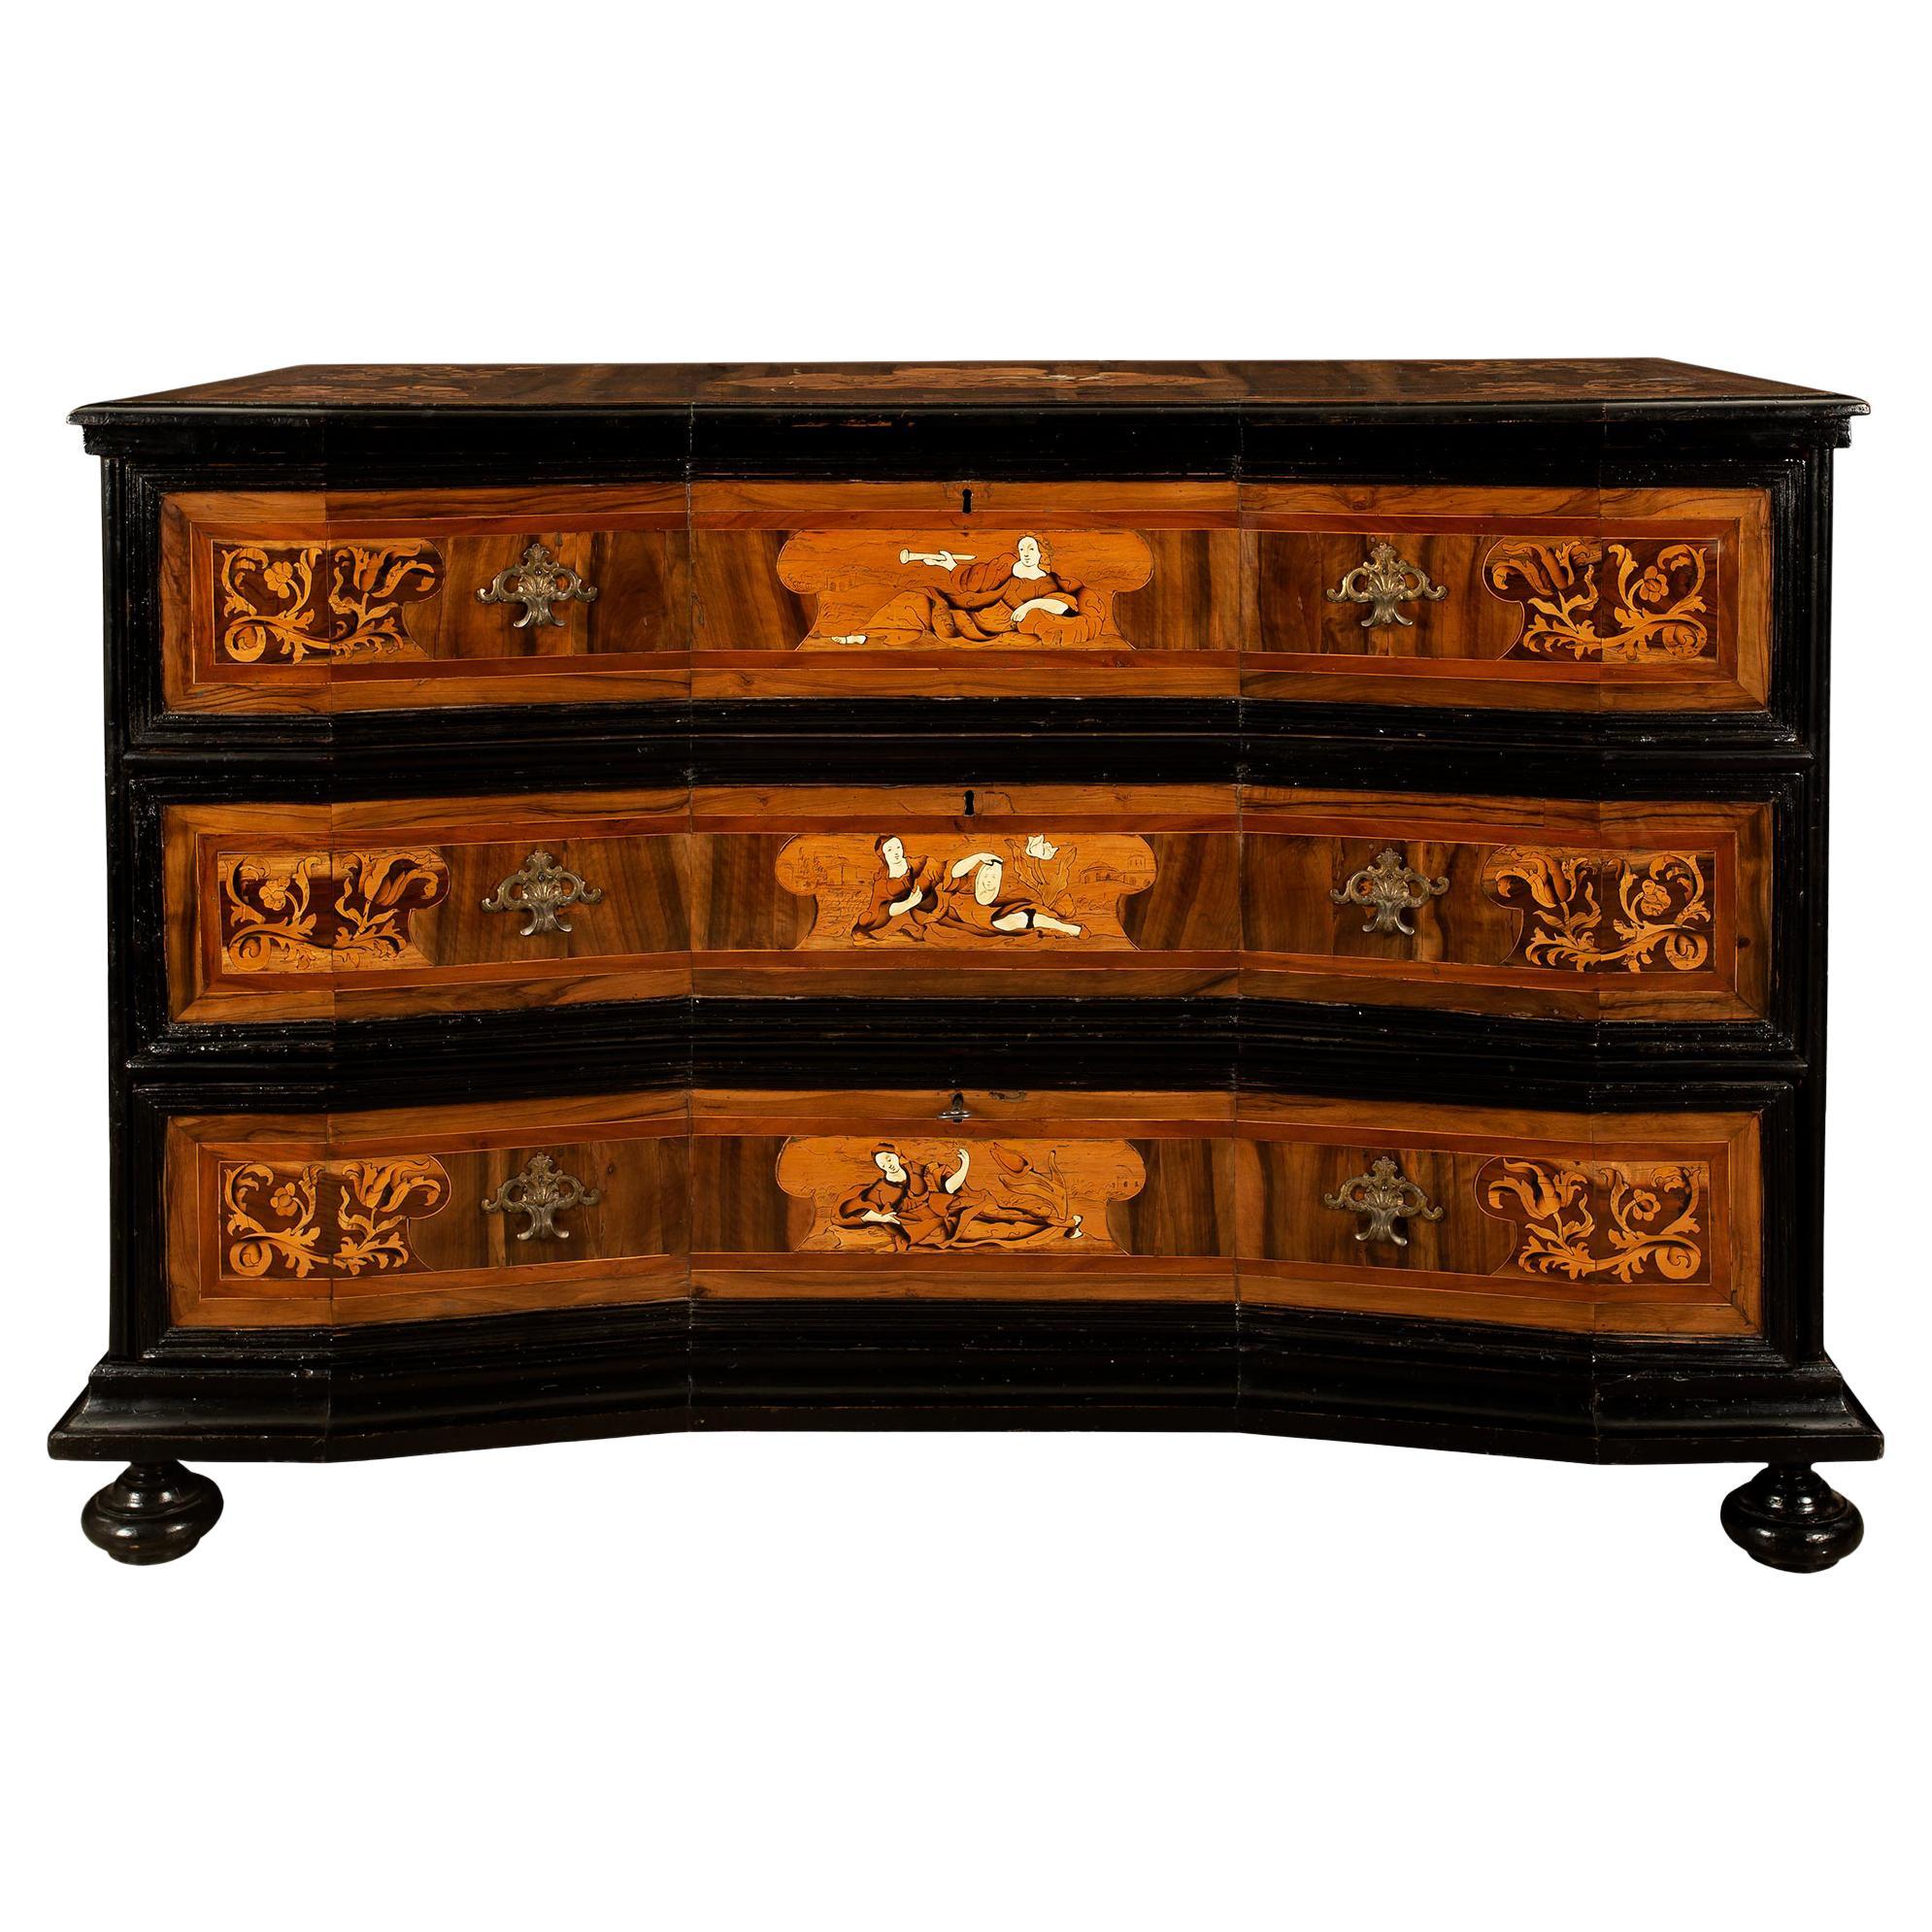 Italian Early 18th Century Inlaid Commode from the Lombardi Region